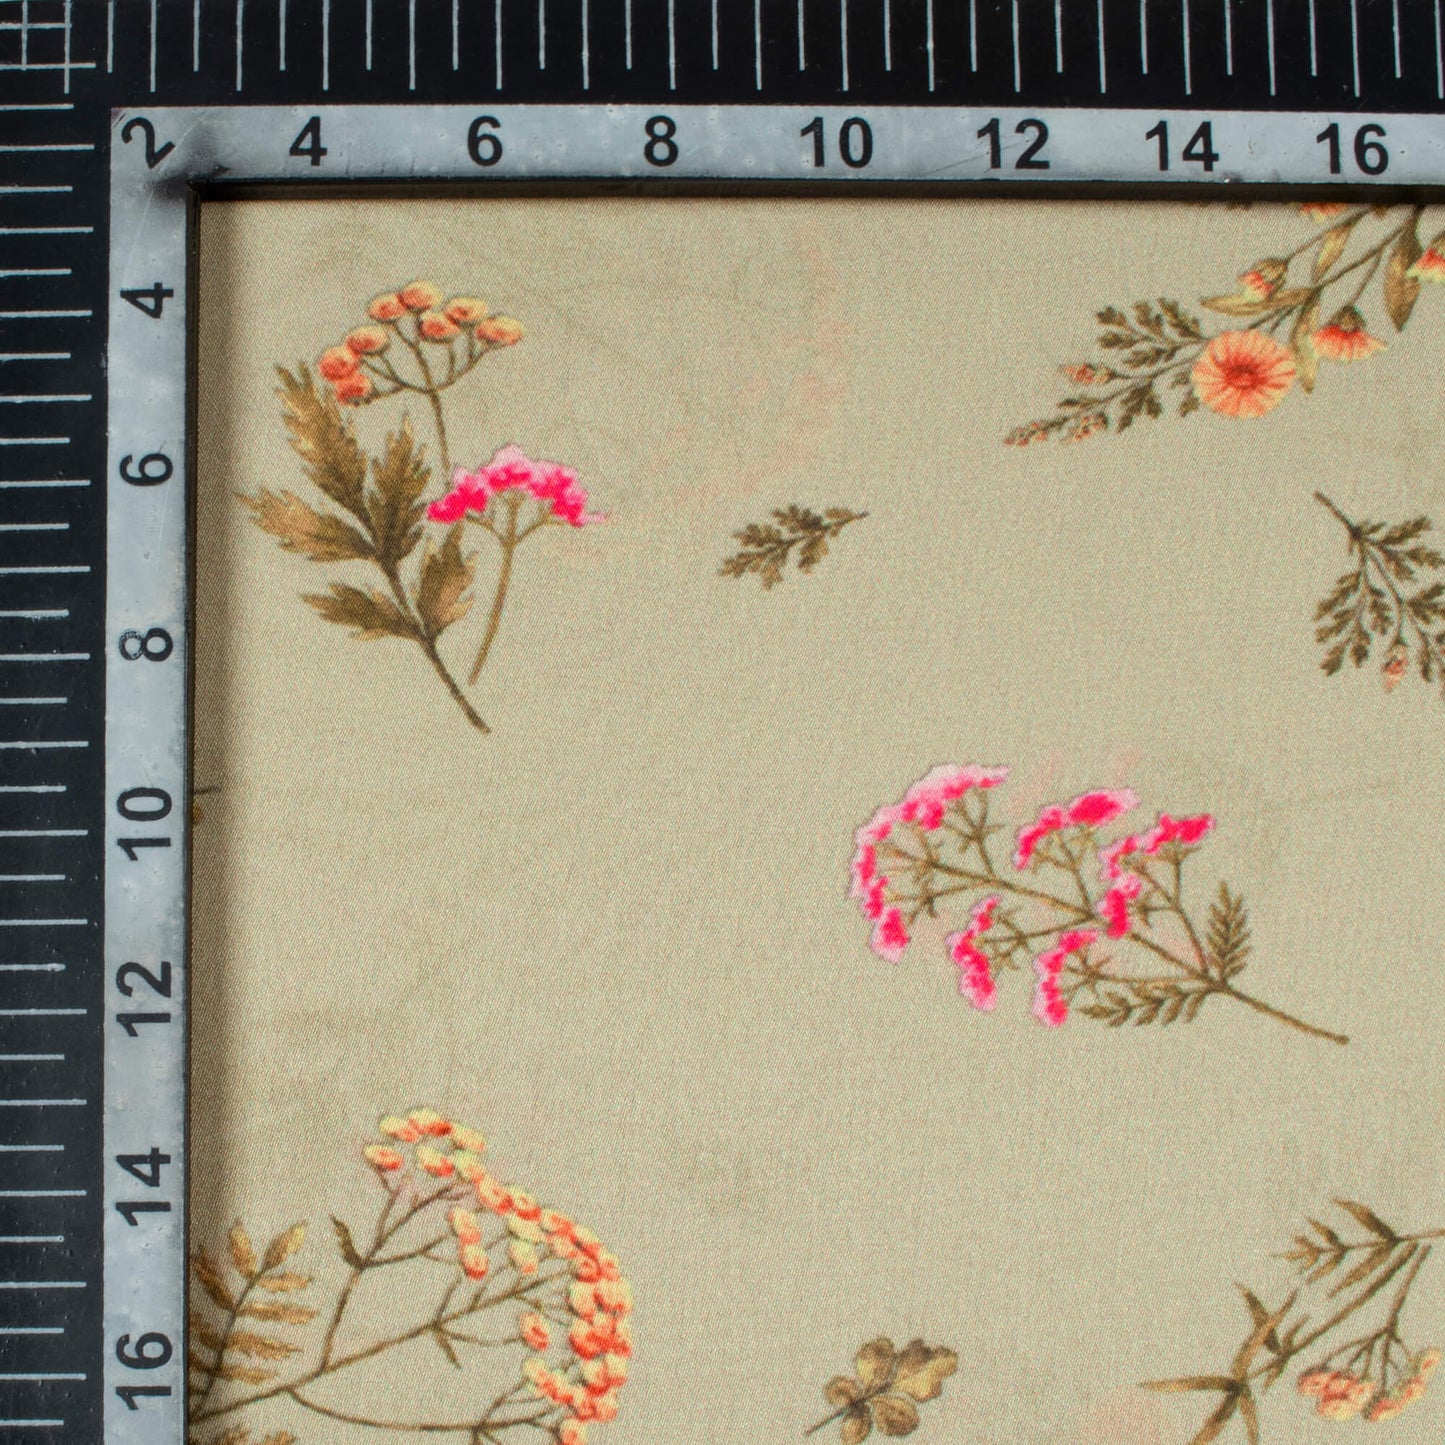 Pale Olive Green And Pink Floral Pattern Digital Print Georgette Satin Fabric